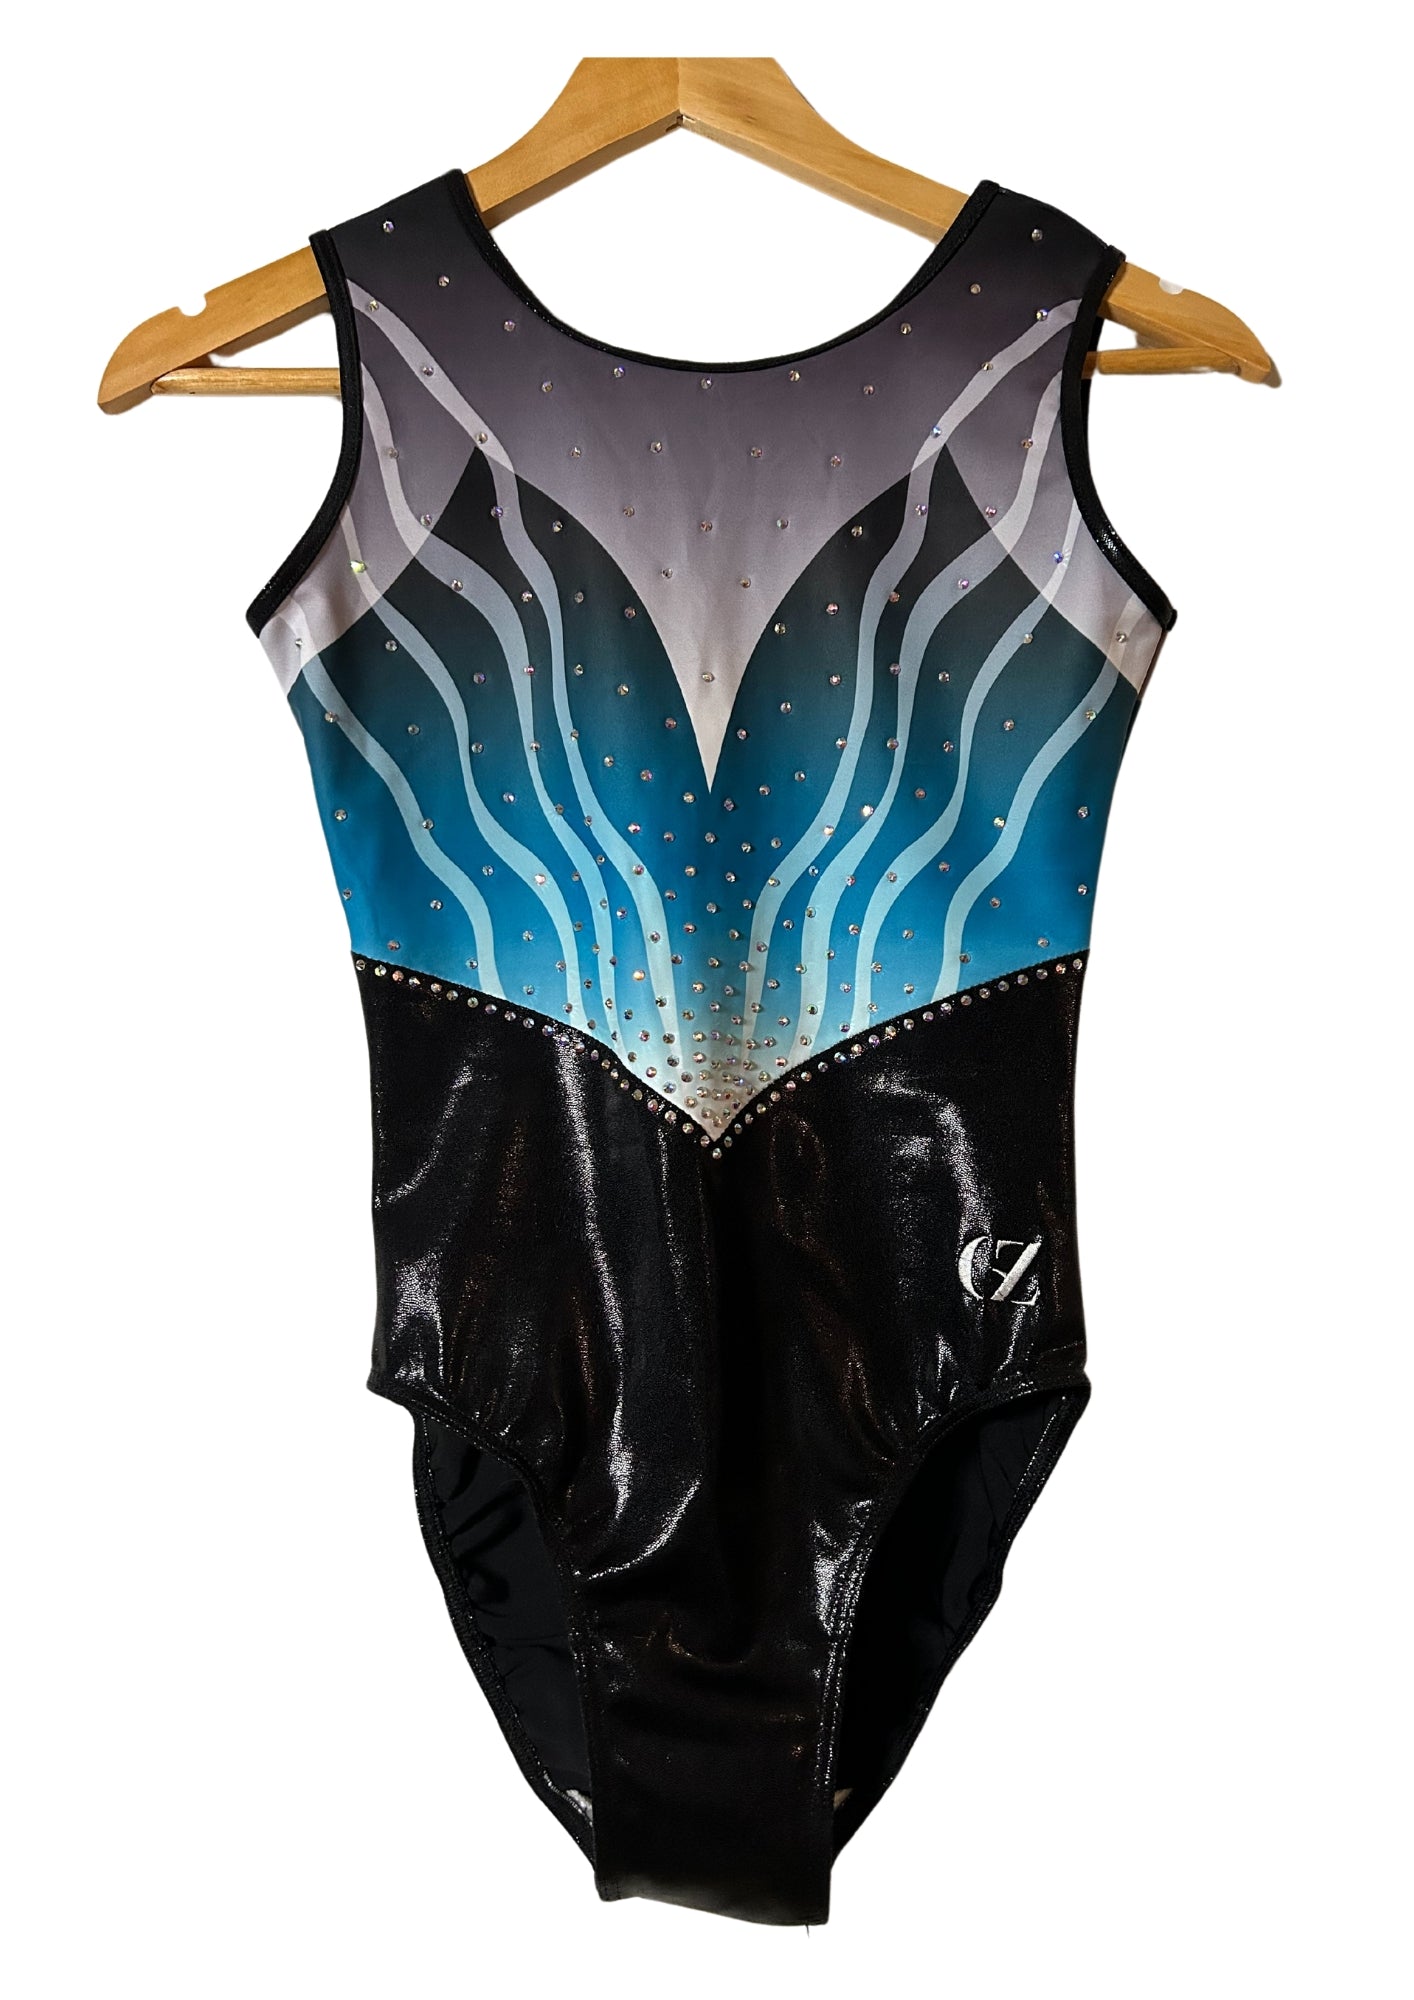 gymnastics leotard for trainings and competitions. cheap, comfortable, shiny. 